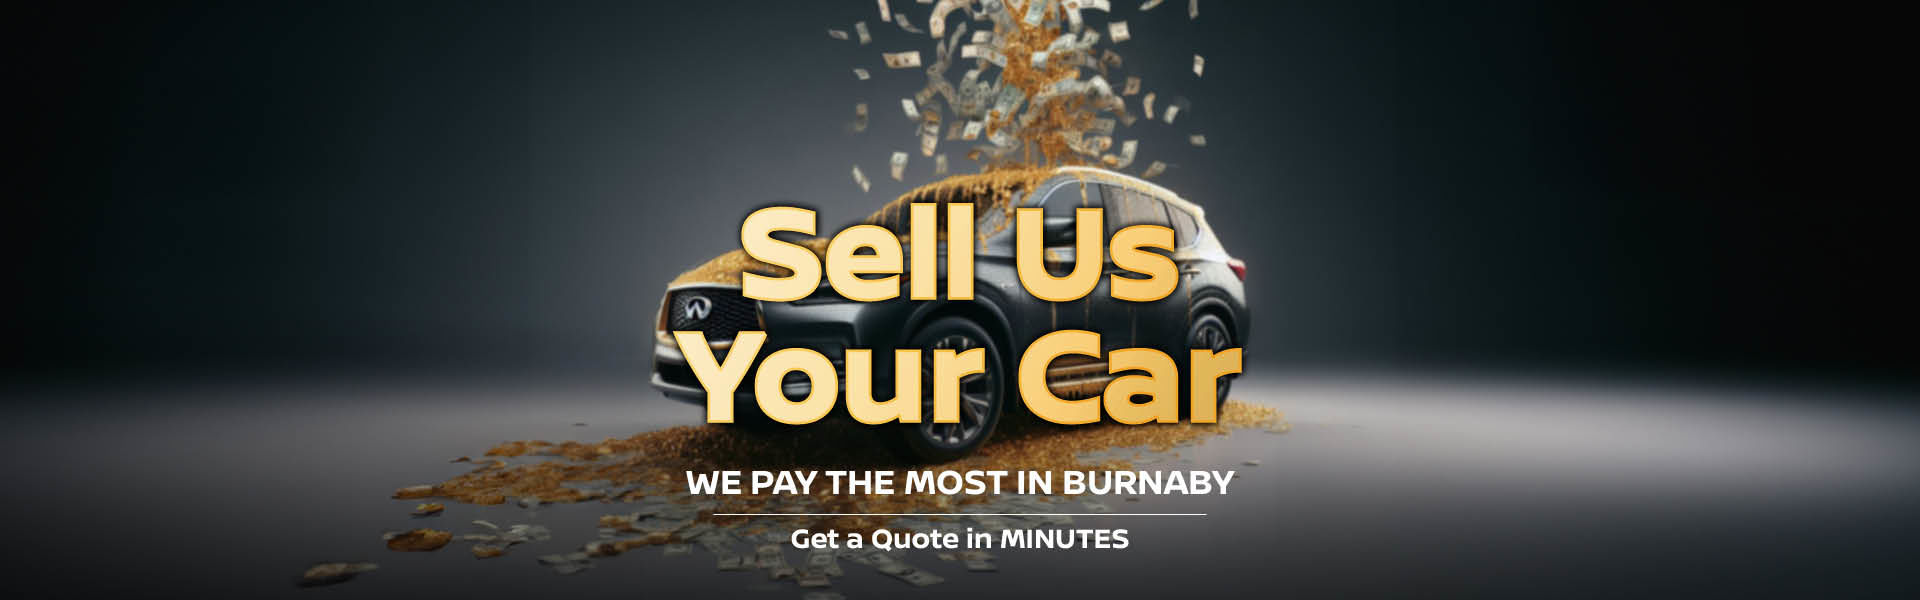 MIB - Sell your car